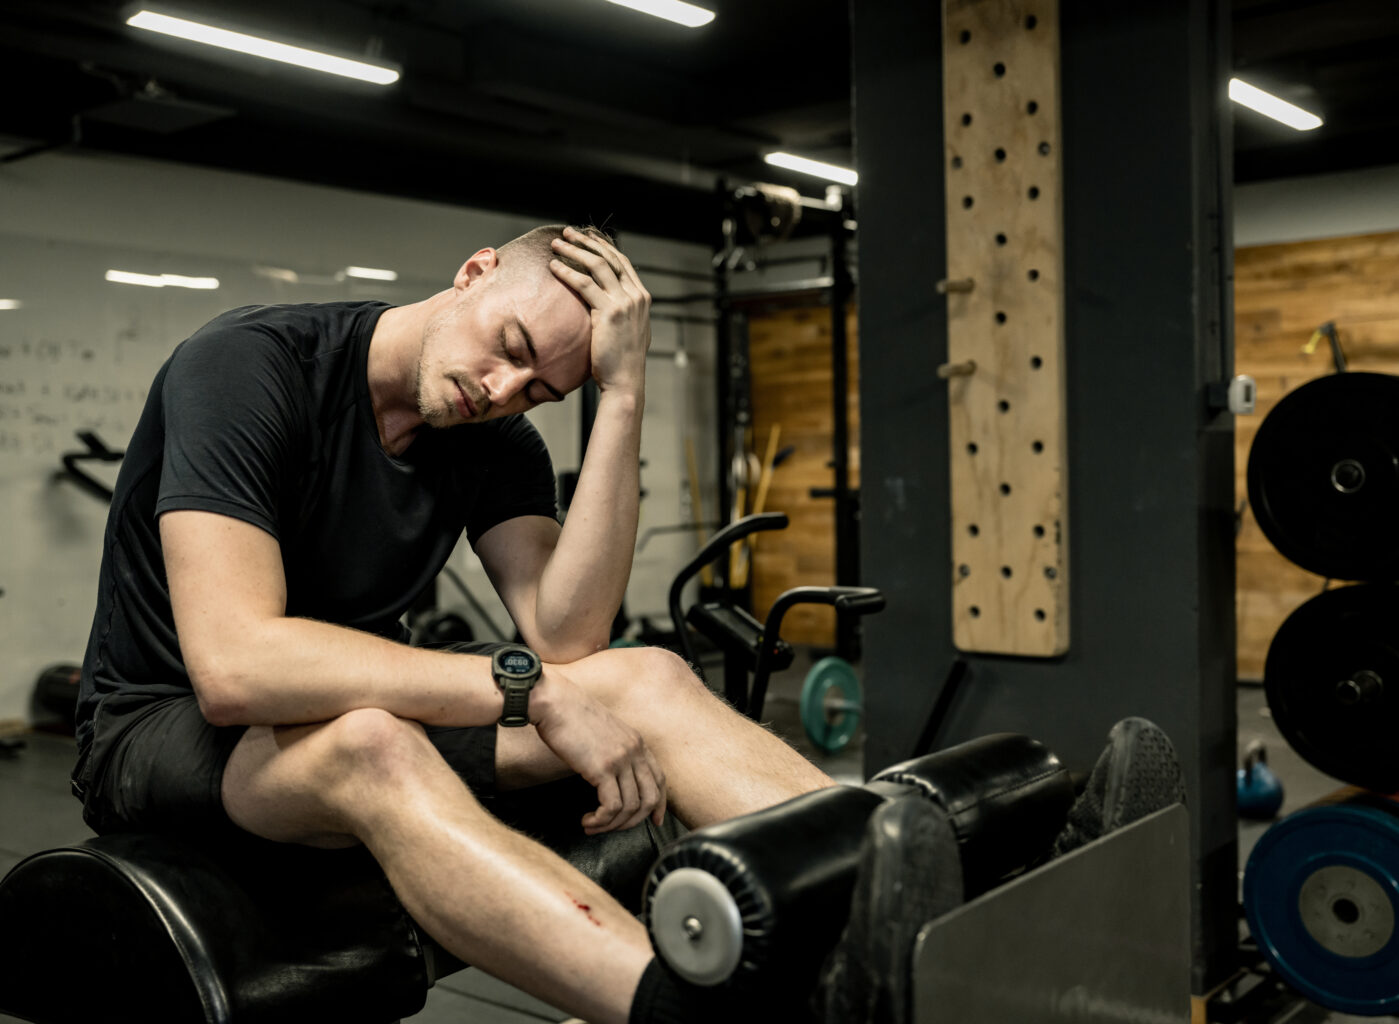 Man taking a break from exercising in the Gym. Source iStock by Getty Images.